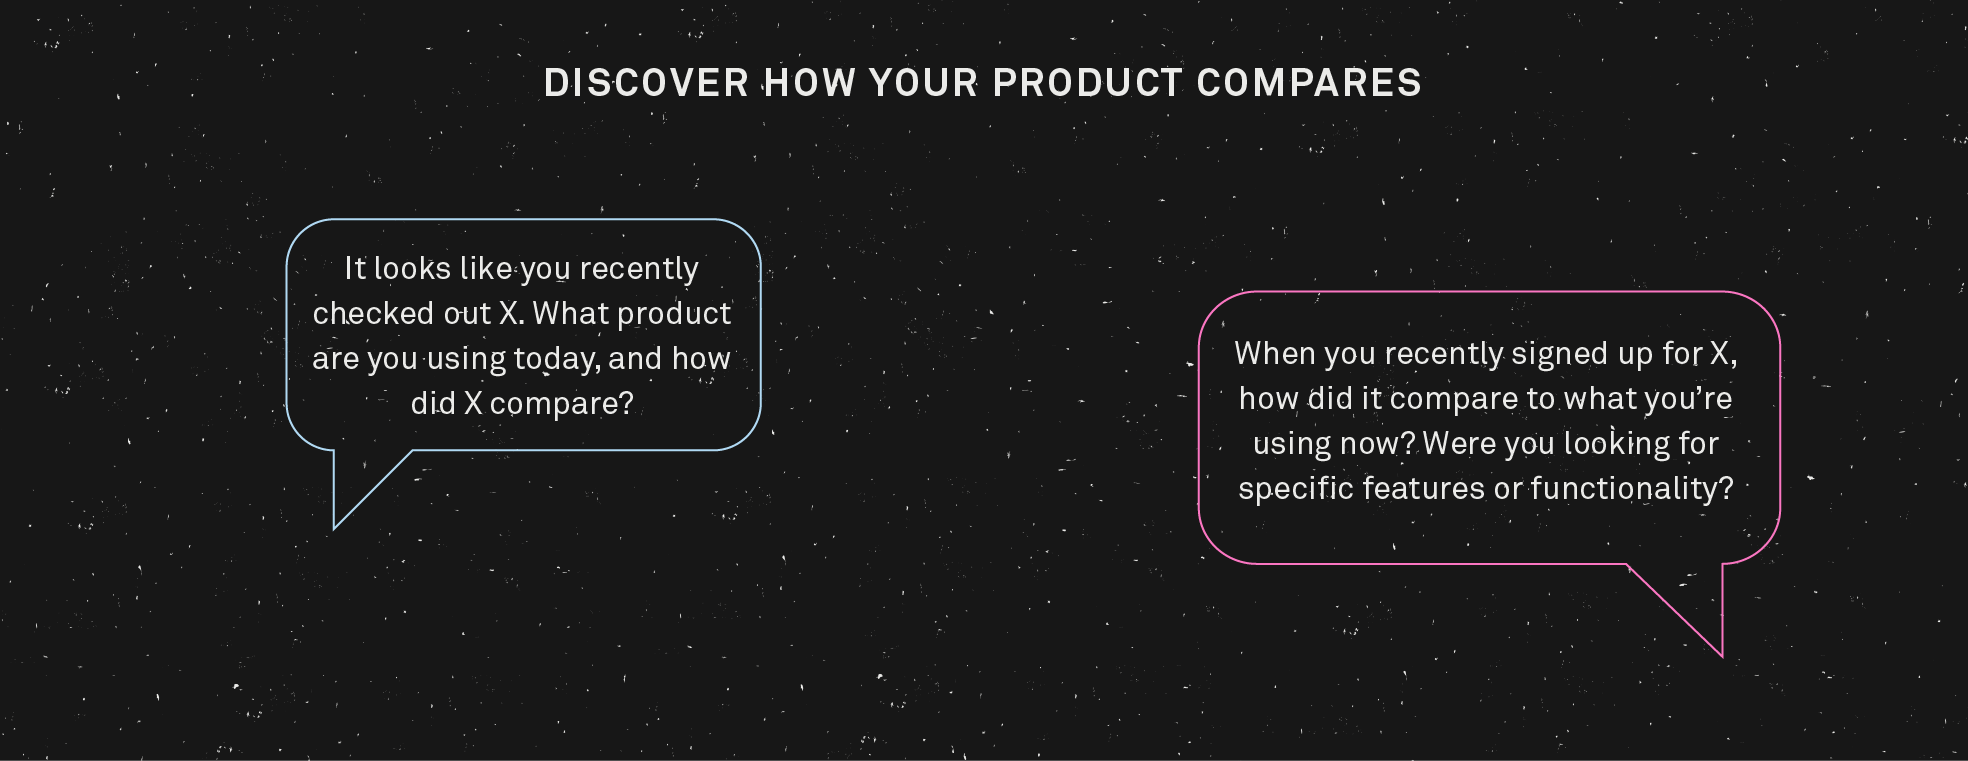 Discover how your product compares